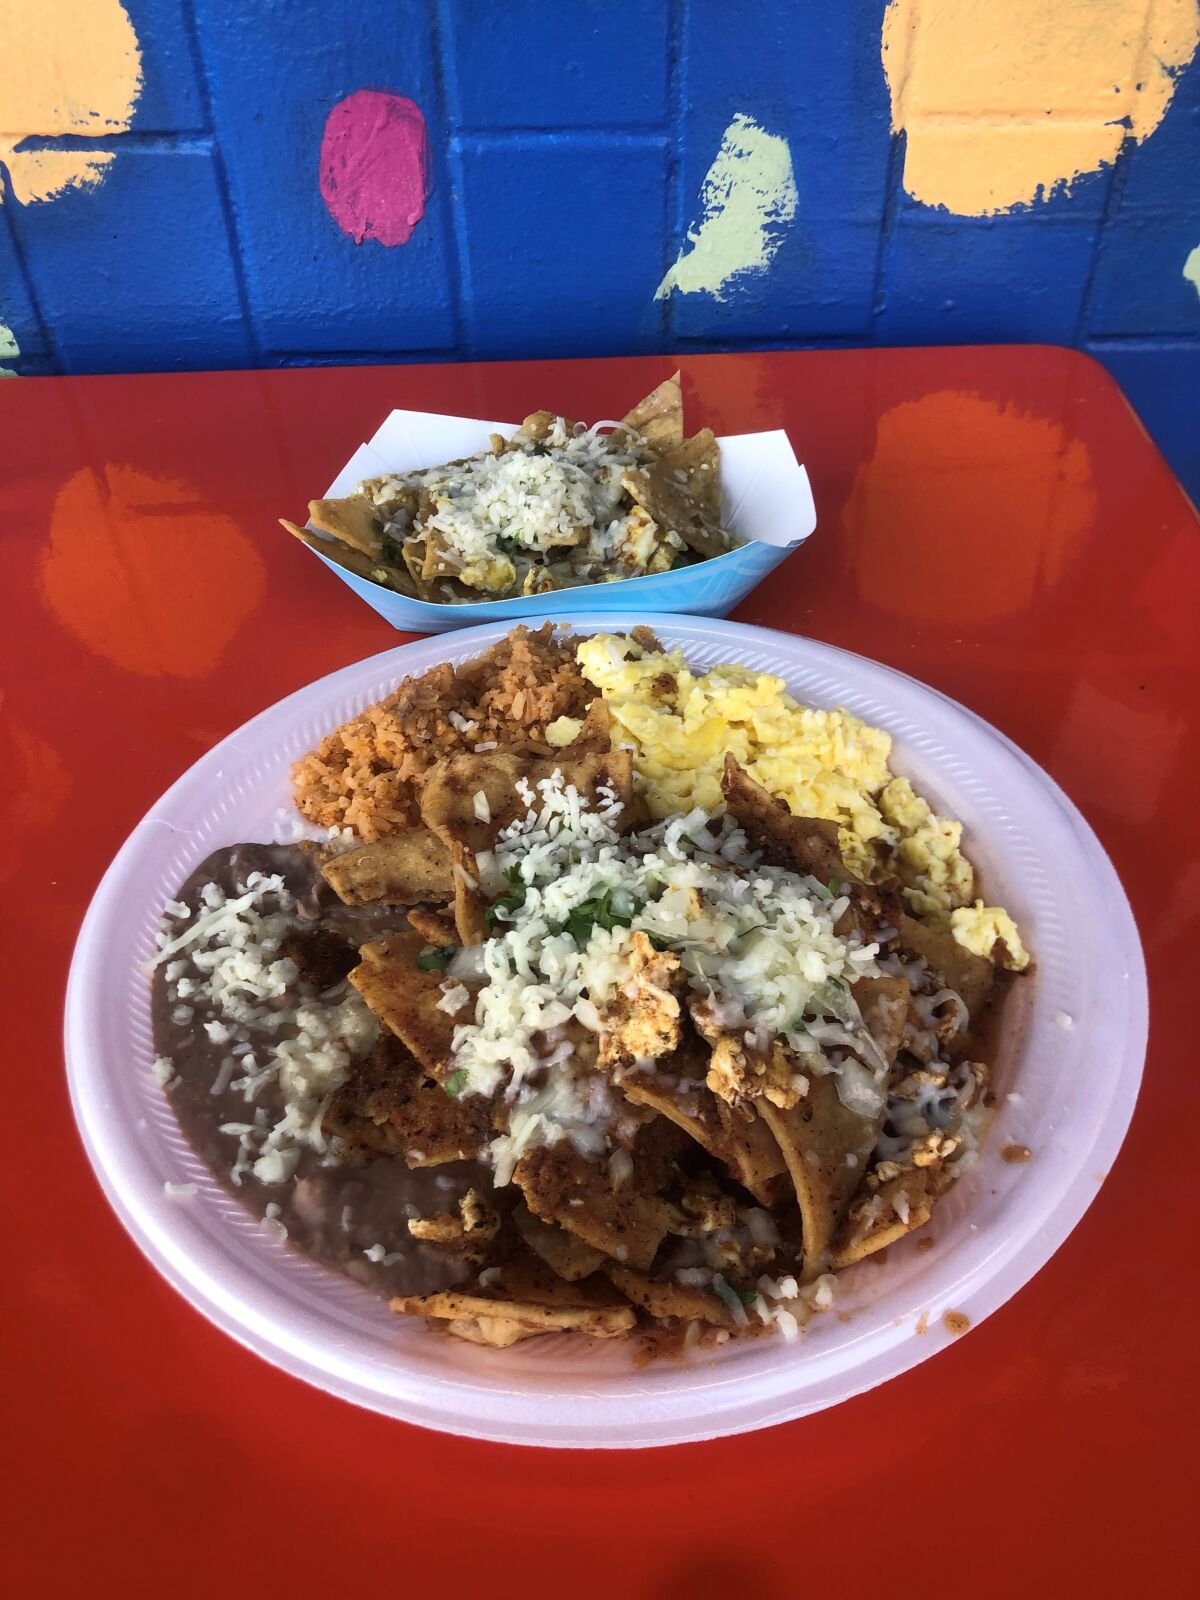 Tacos Delta's chilaquiles two ways: red and green.